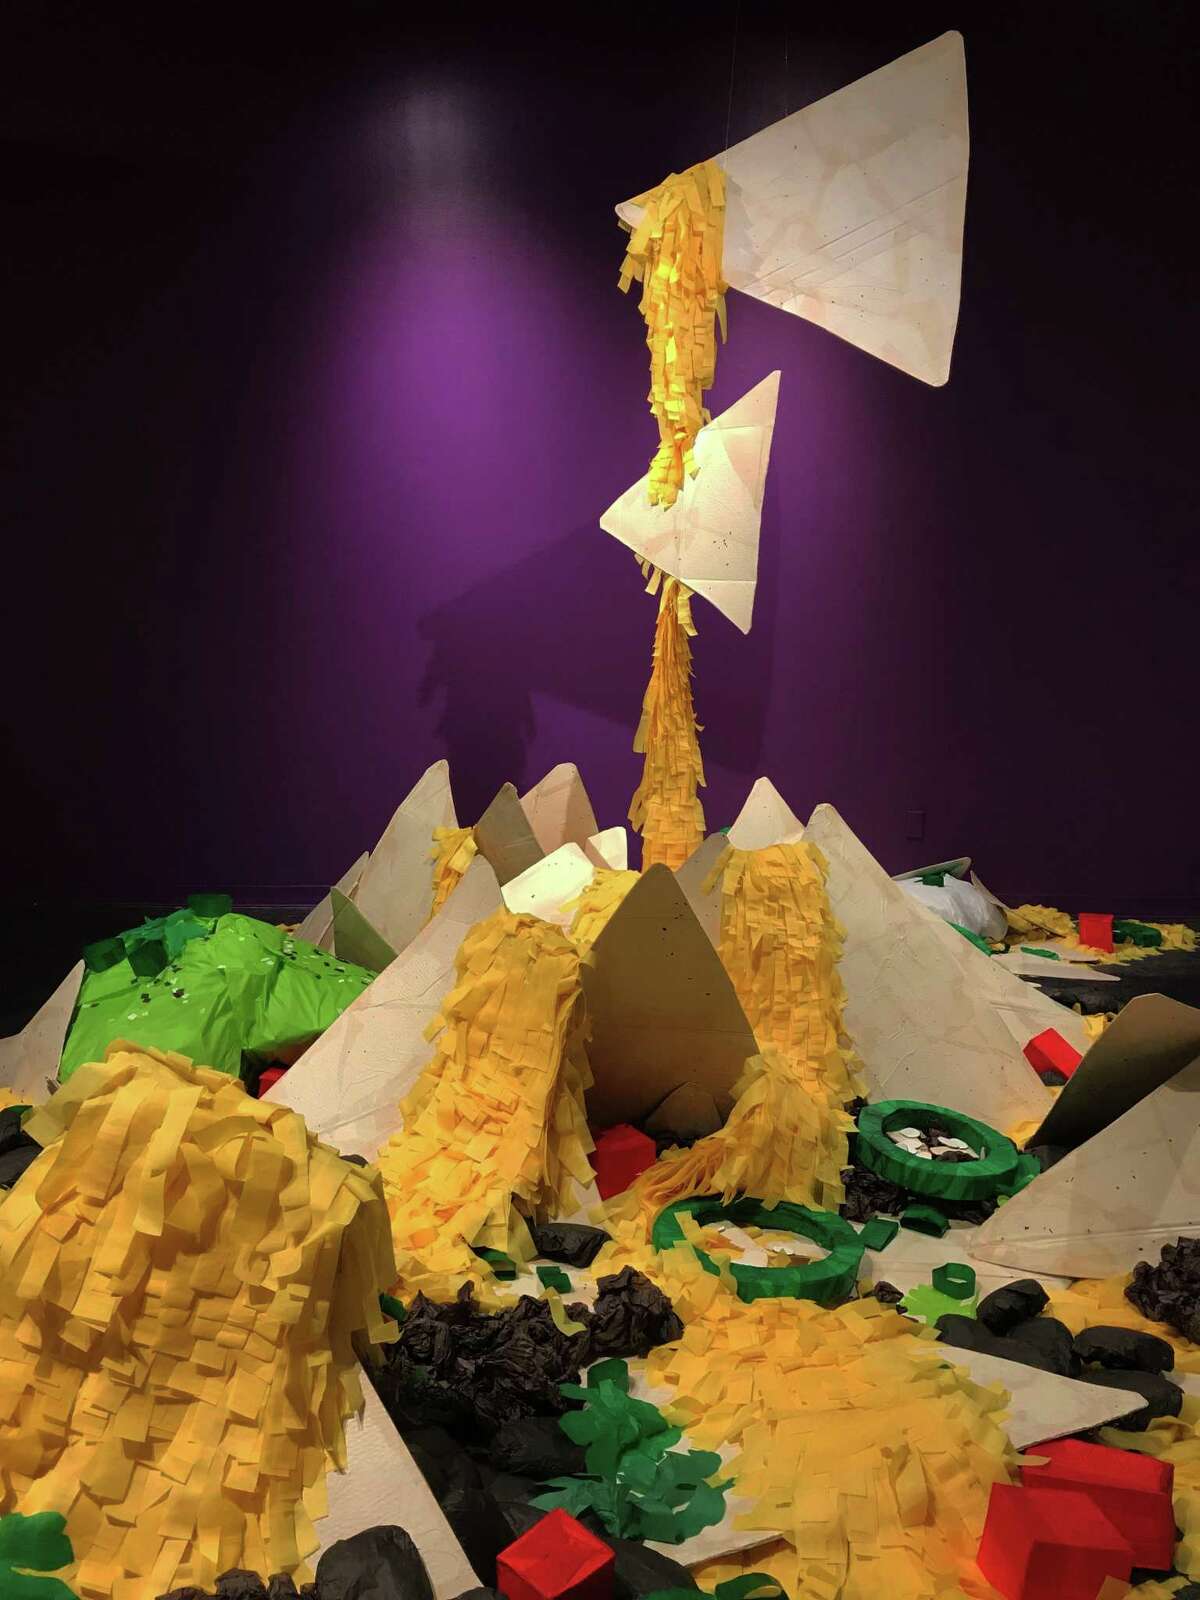 "Floor Nachos Supreme" is the largest of the pinata-inspired sculptures in Justin Favela's solo show "All You Can Eat," on view through Sept. 1 at Houston Center for Contemmporary Craft.